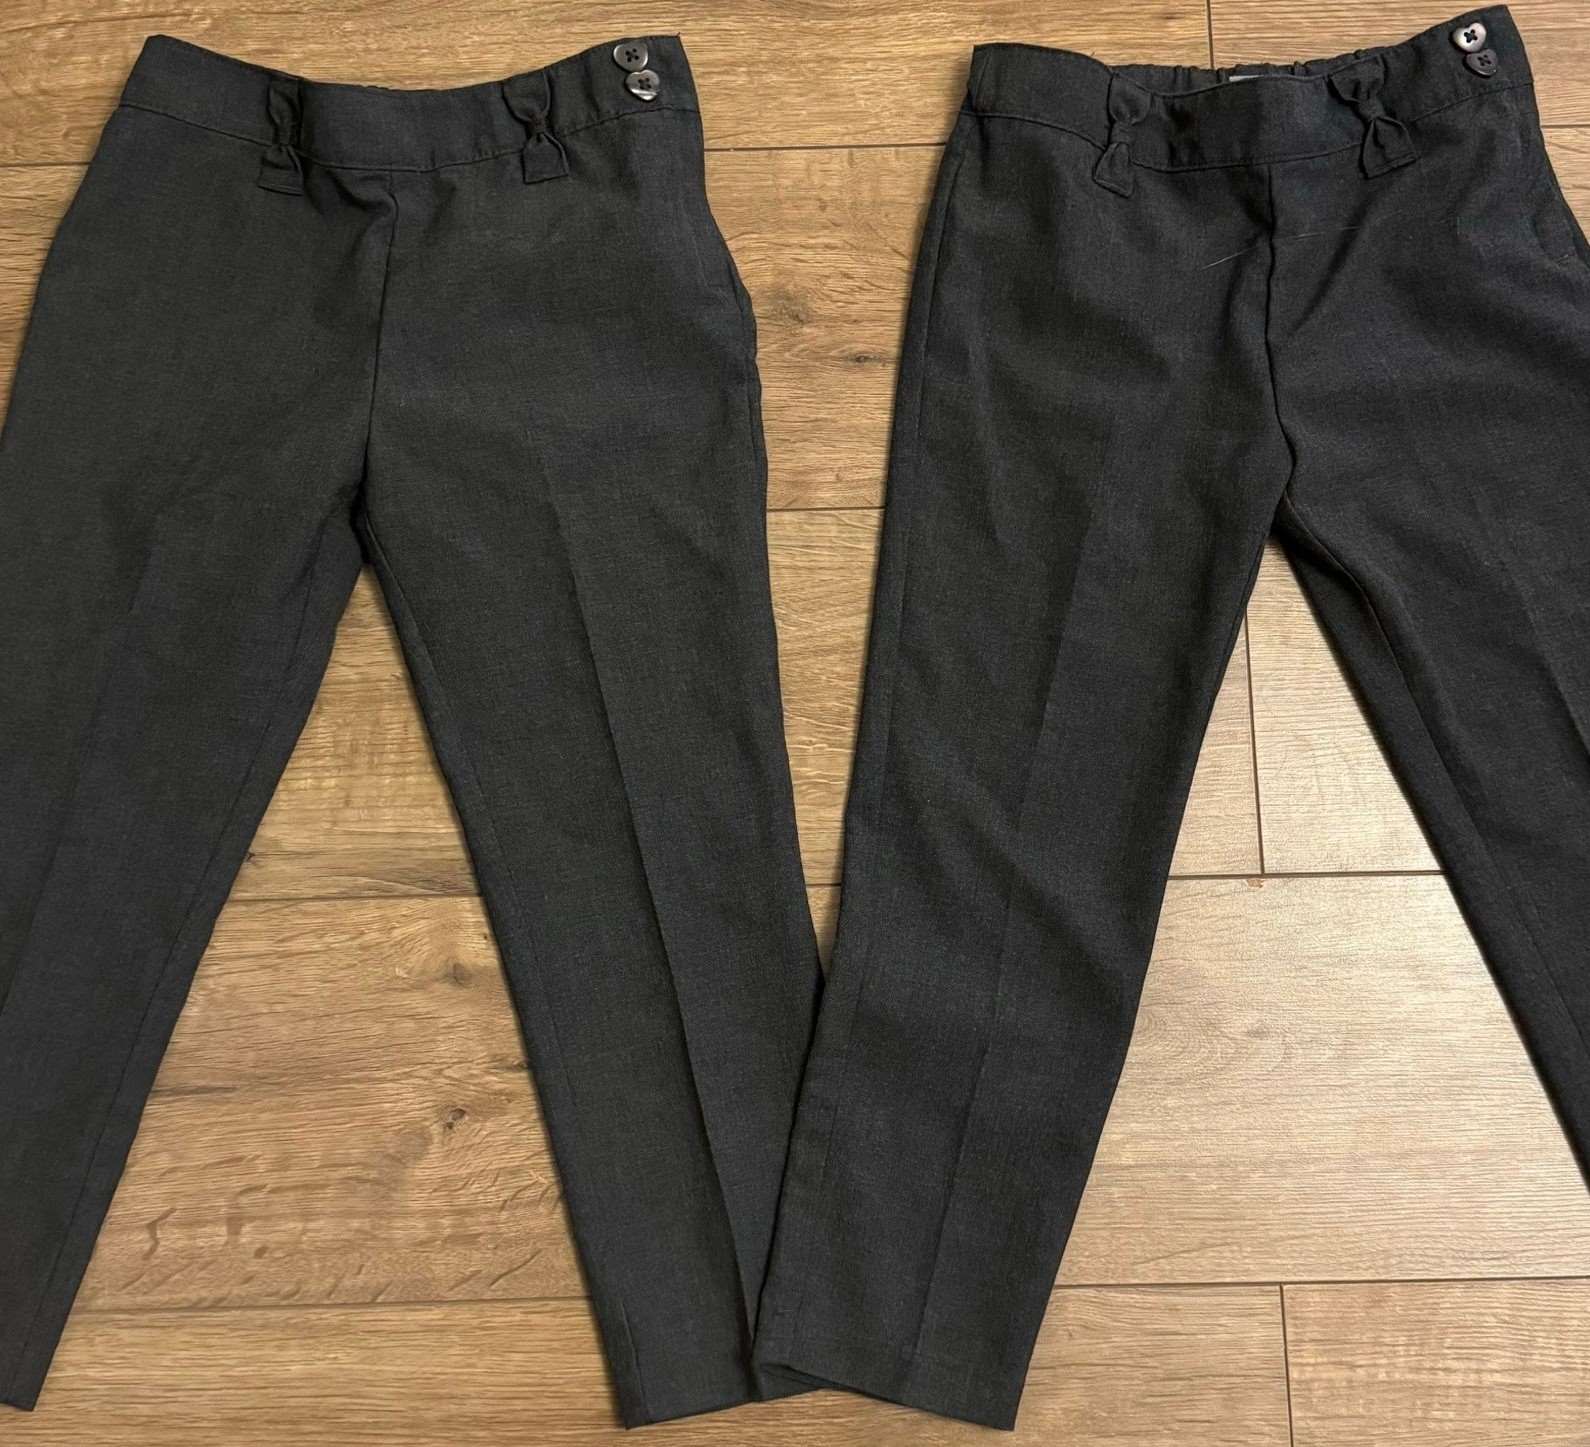 Trousers (with bows or charms) 5-6 yrs